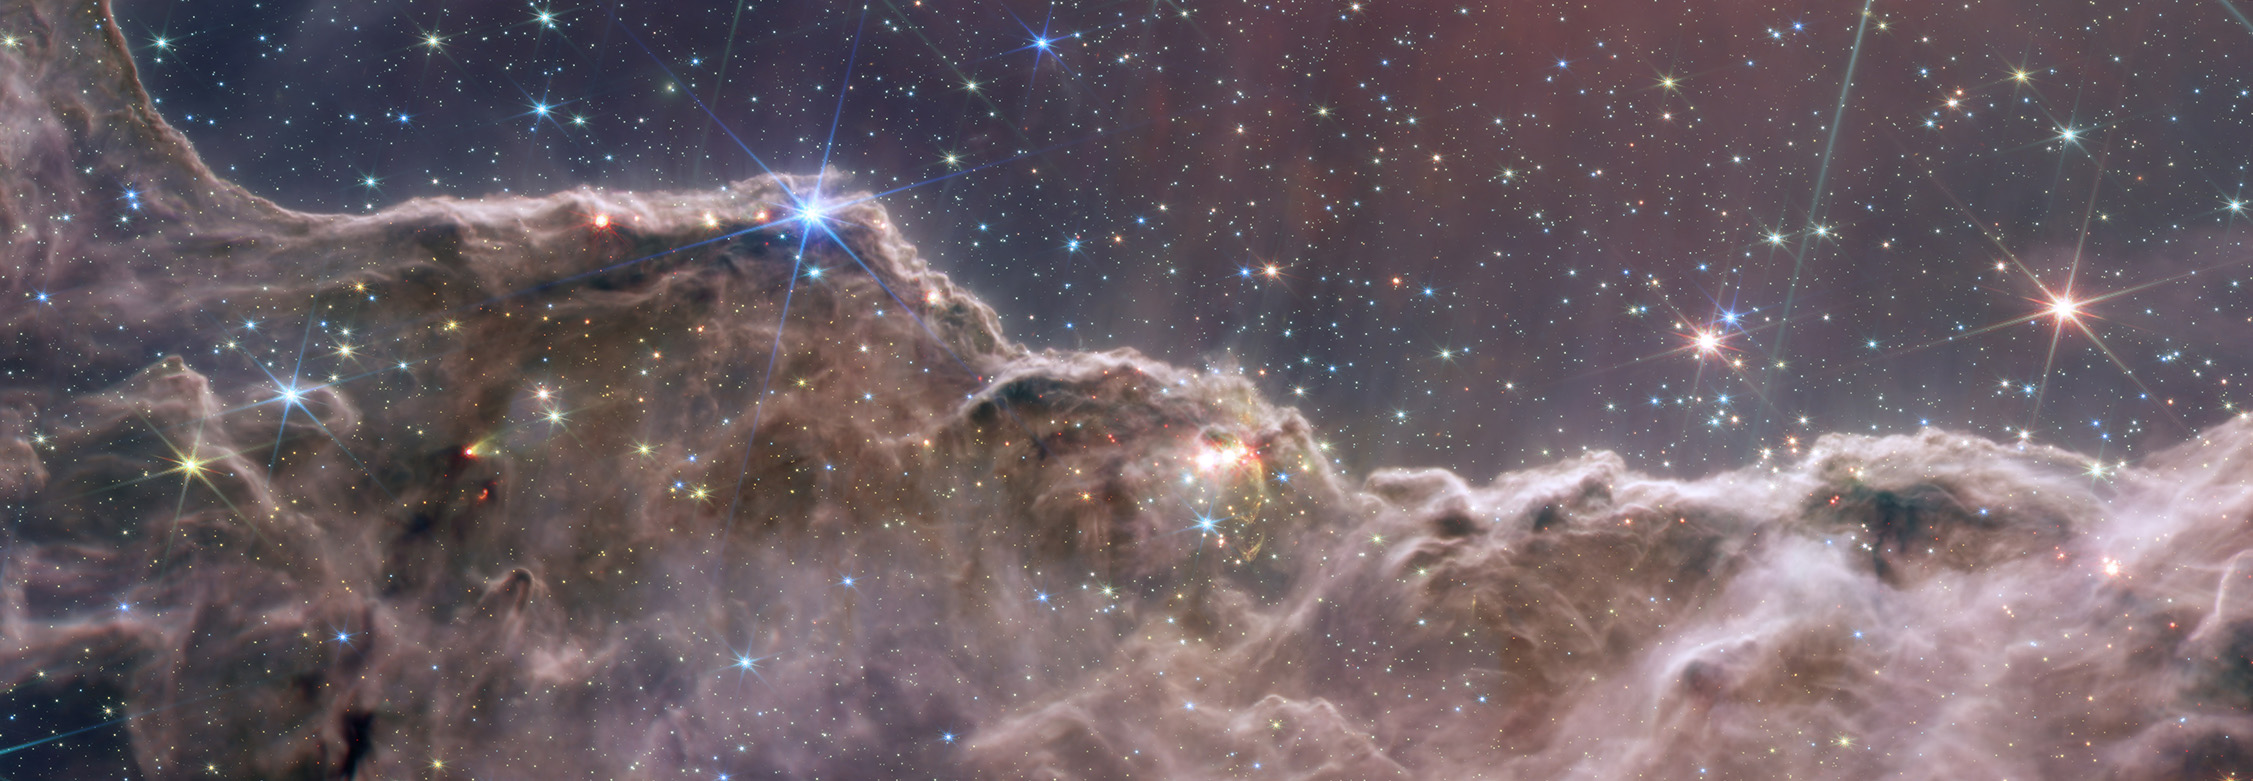 Astronomers using JWST combined the capabilities of the telescope’s two cameras to create a never-before-seen view of a star-forming region in the Carina Nebula. Captured in infrared light by the Near-Infrared Camera (NIRCam) and Mid-Infrared Instrument (MIRI), this combined image reveals previously invisible areas of star birth. 